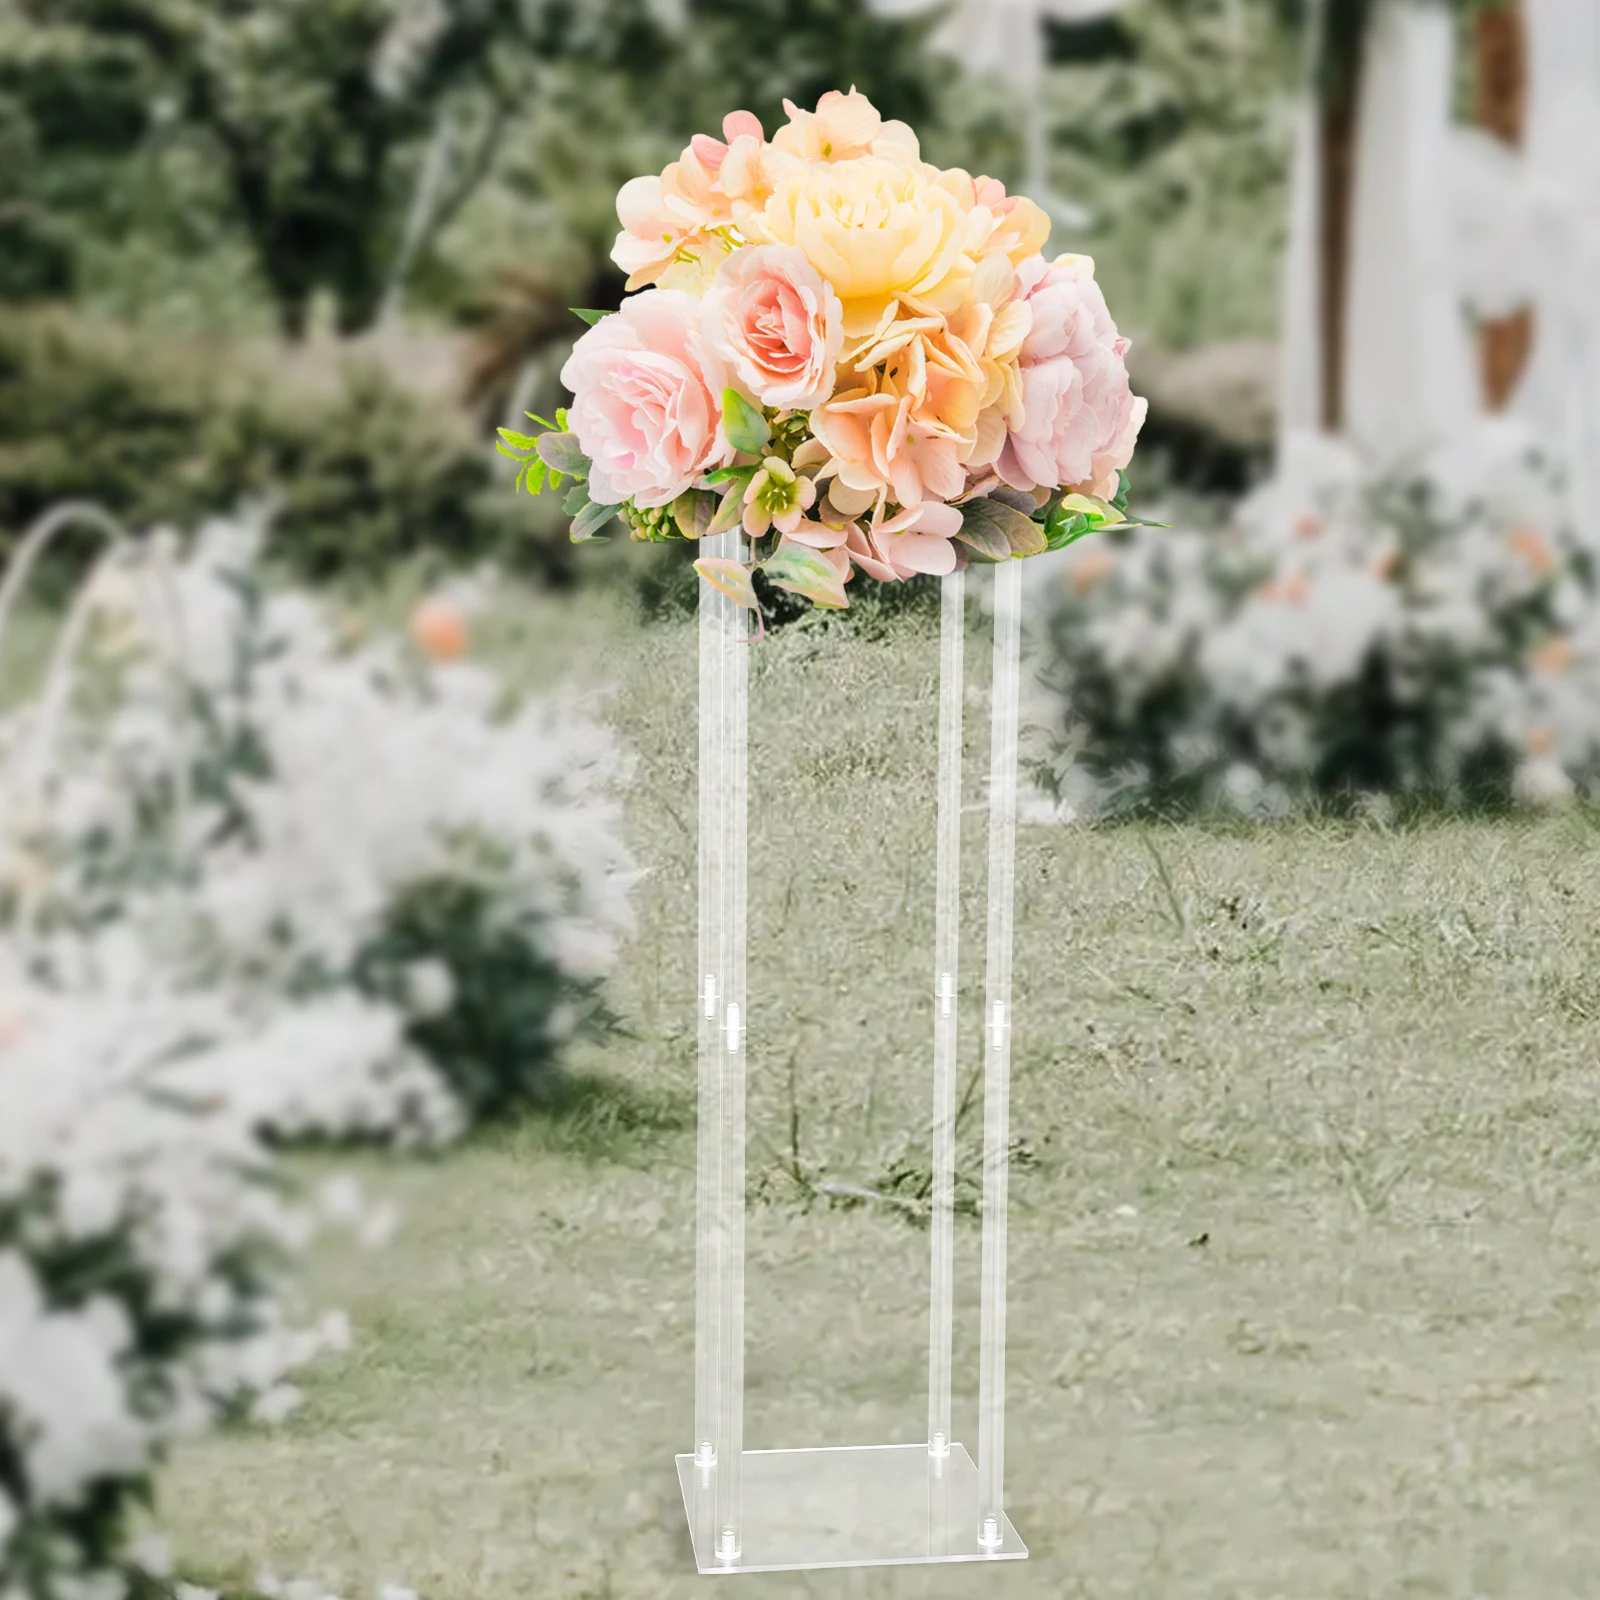 

Elegant Crystal Rectangle Acrylic Wedding Flower Stand Tabletop Display Rack For Table Centerpiece Decoration